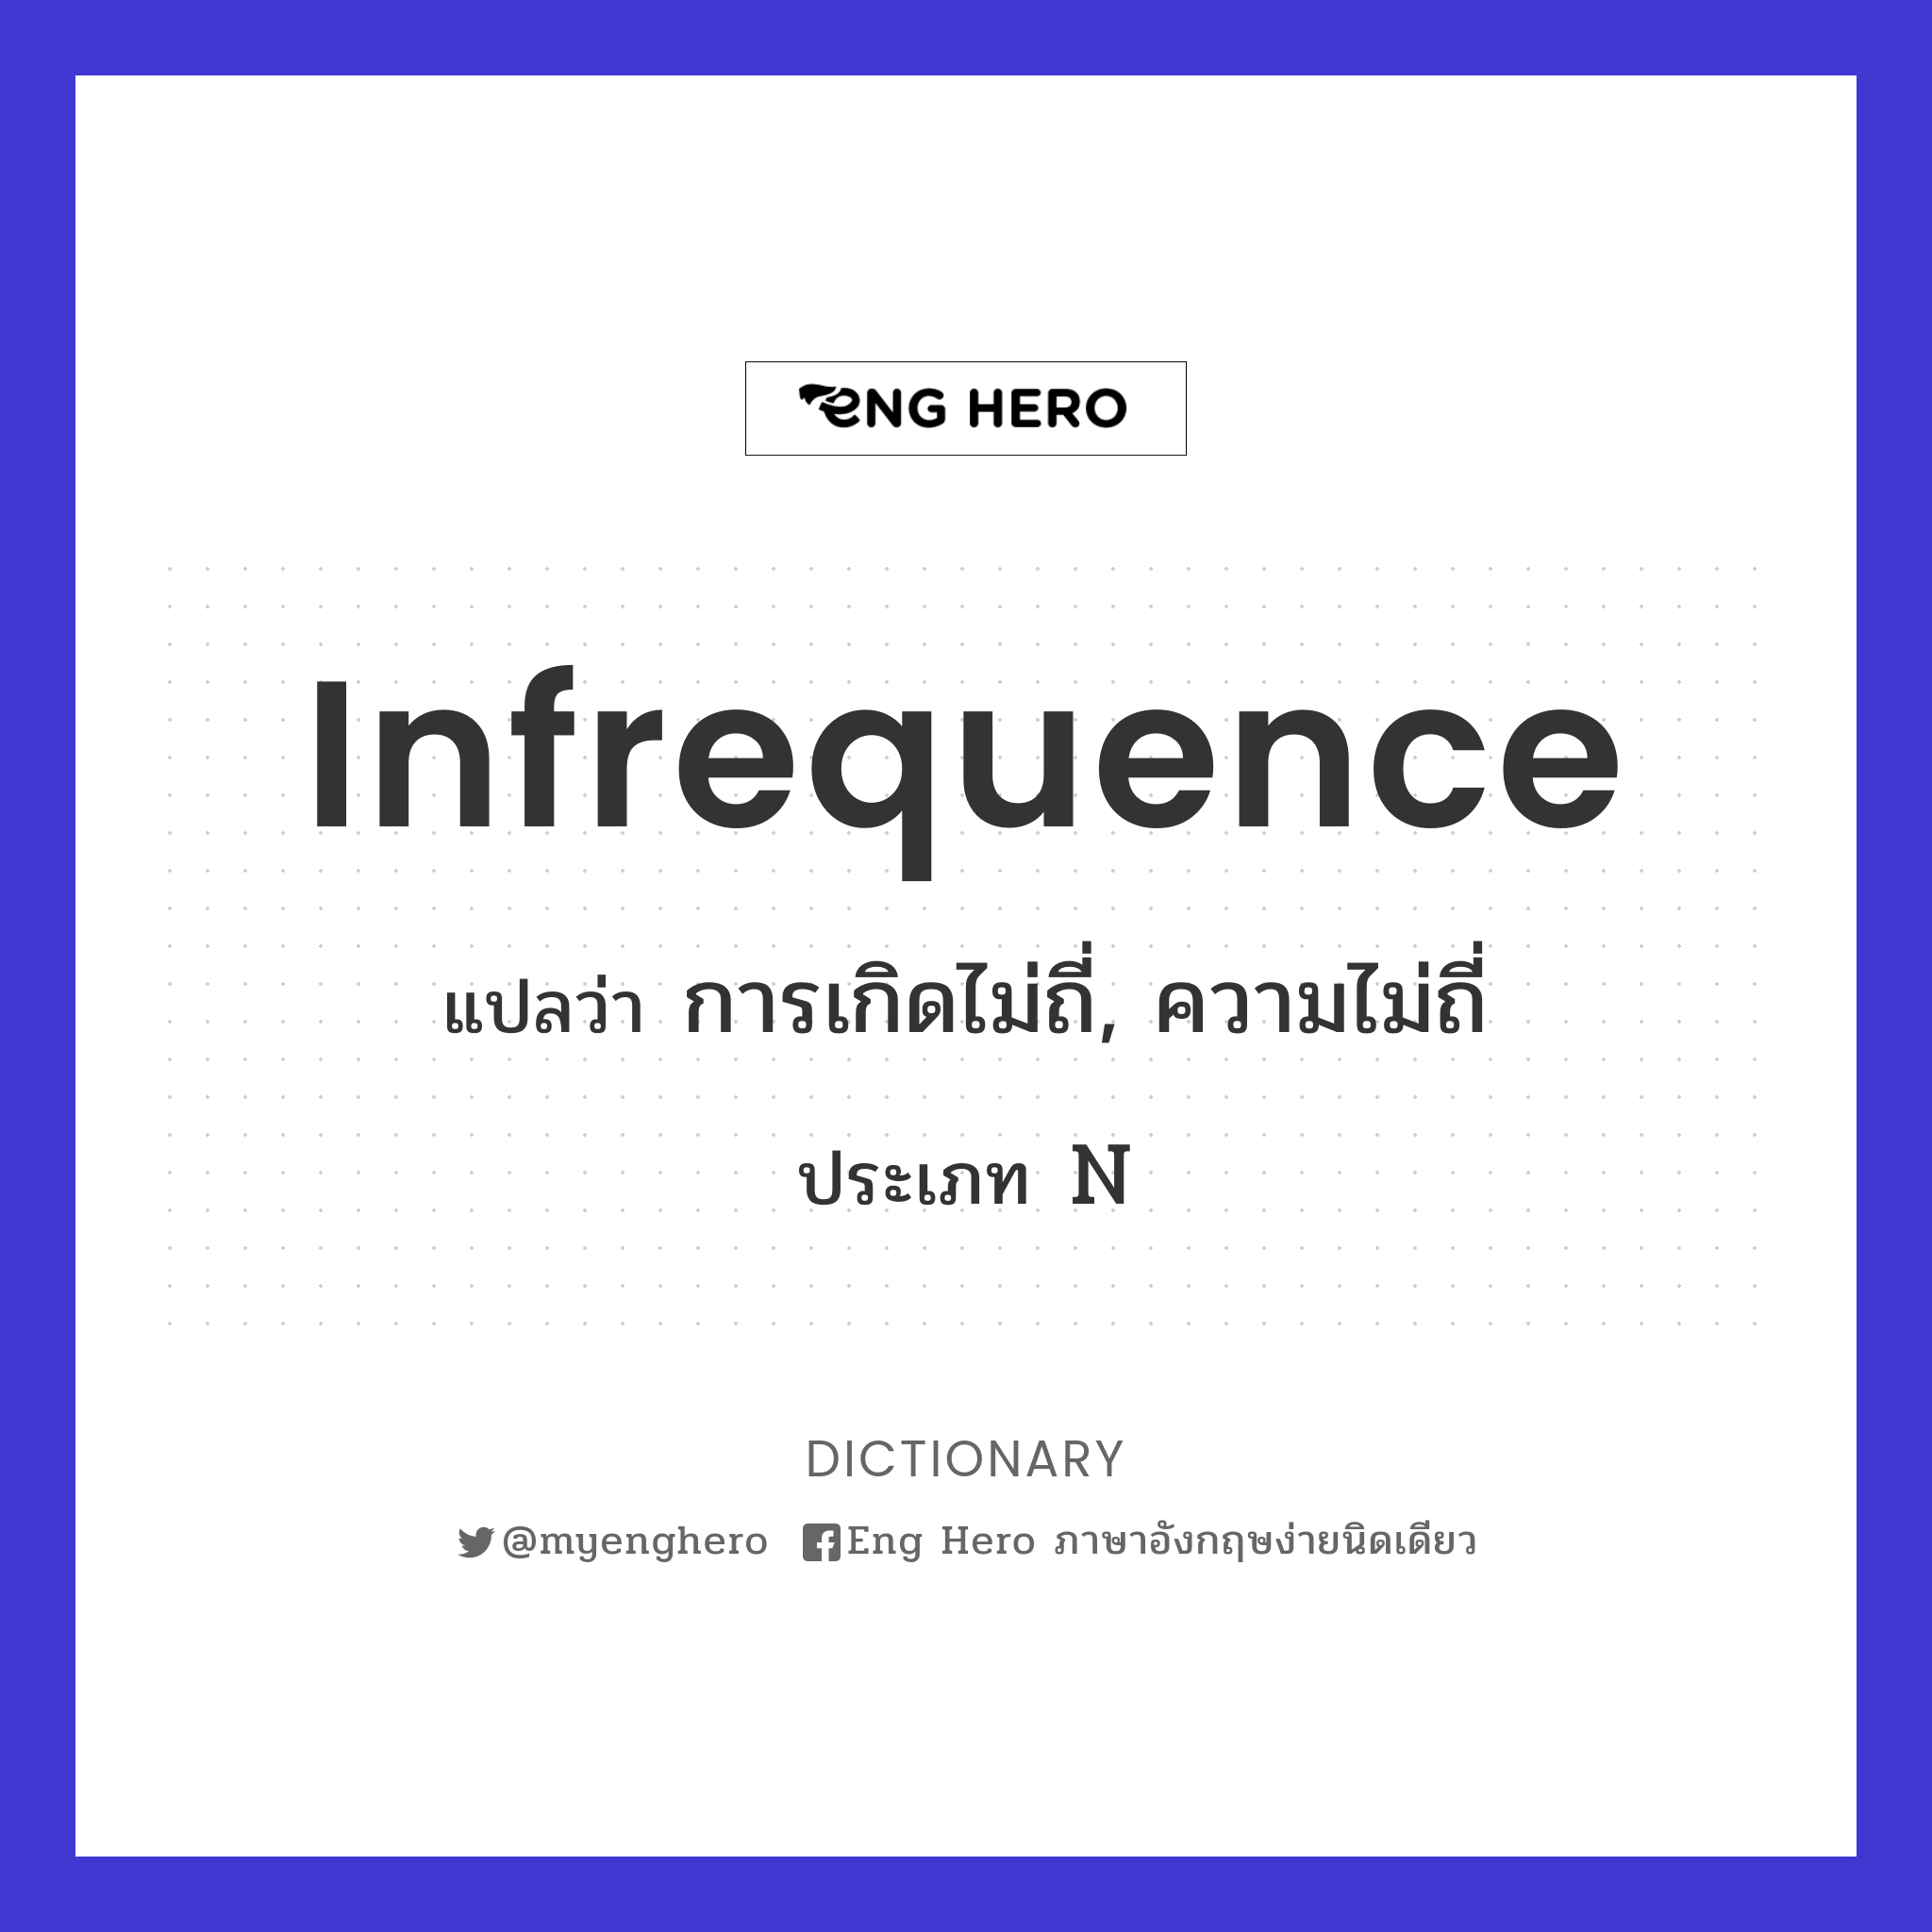 infrequence